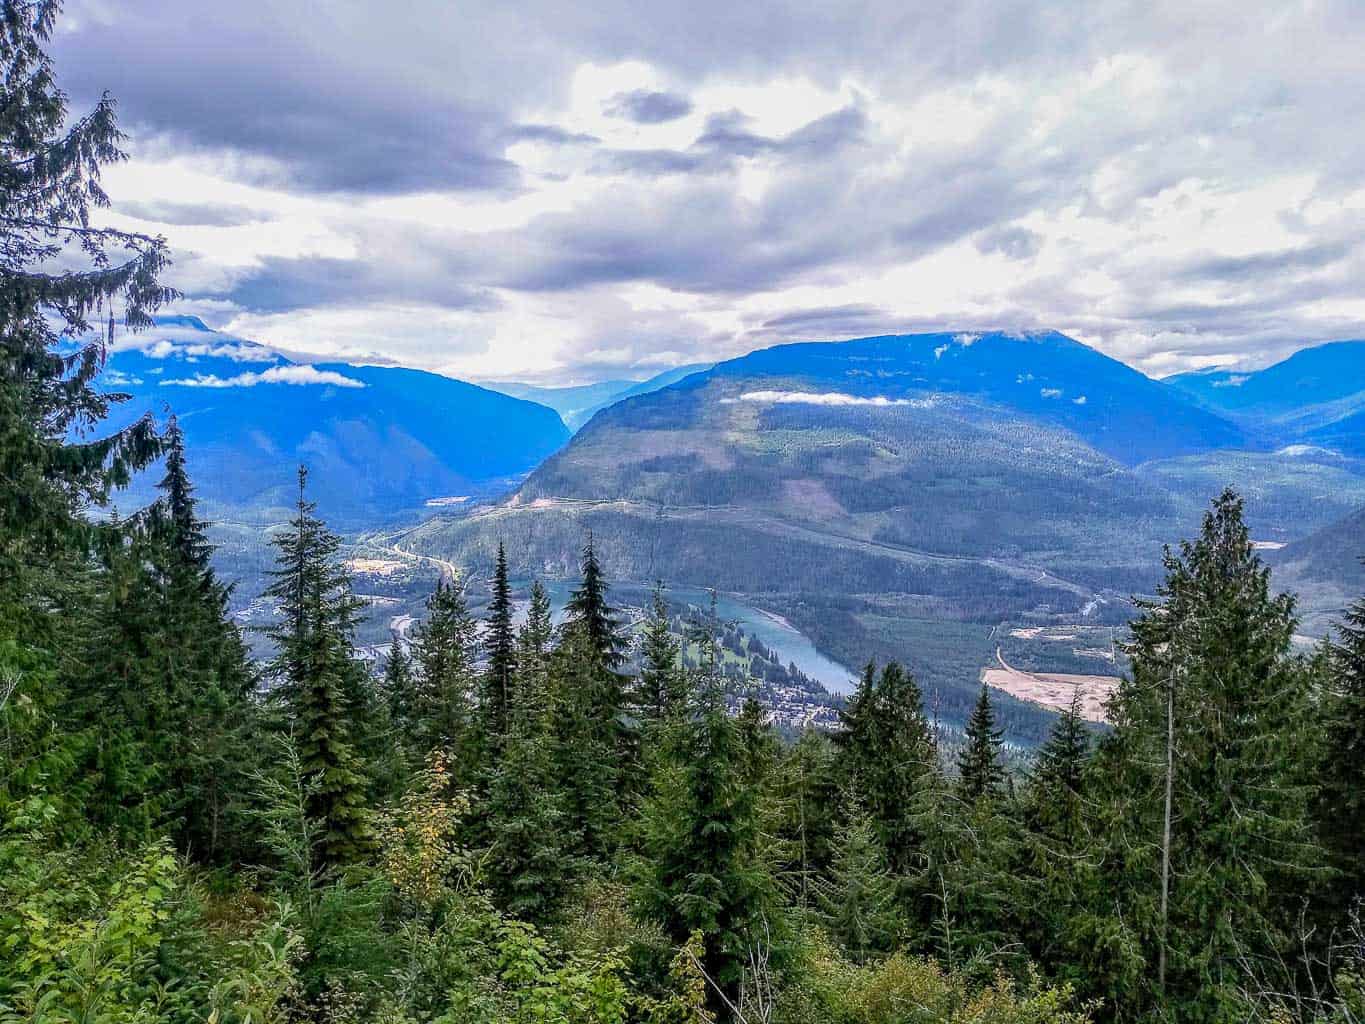 Mount Revelstoke National Park is one of the best national parks in Canada